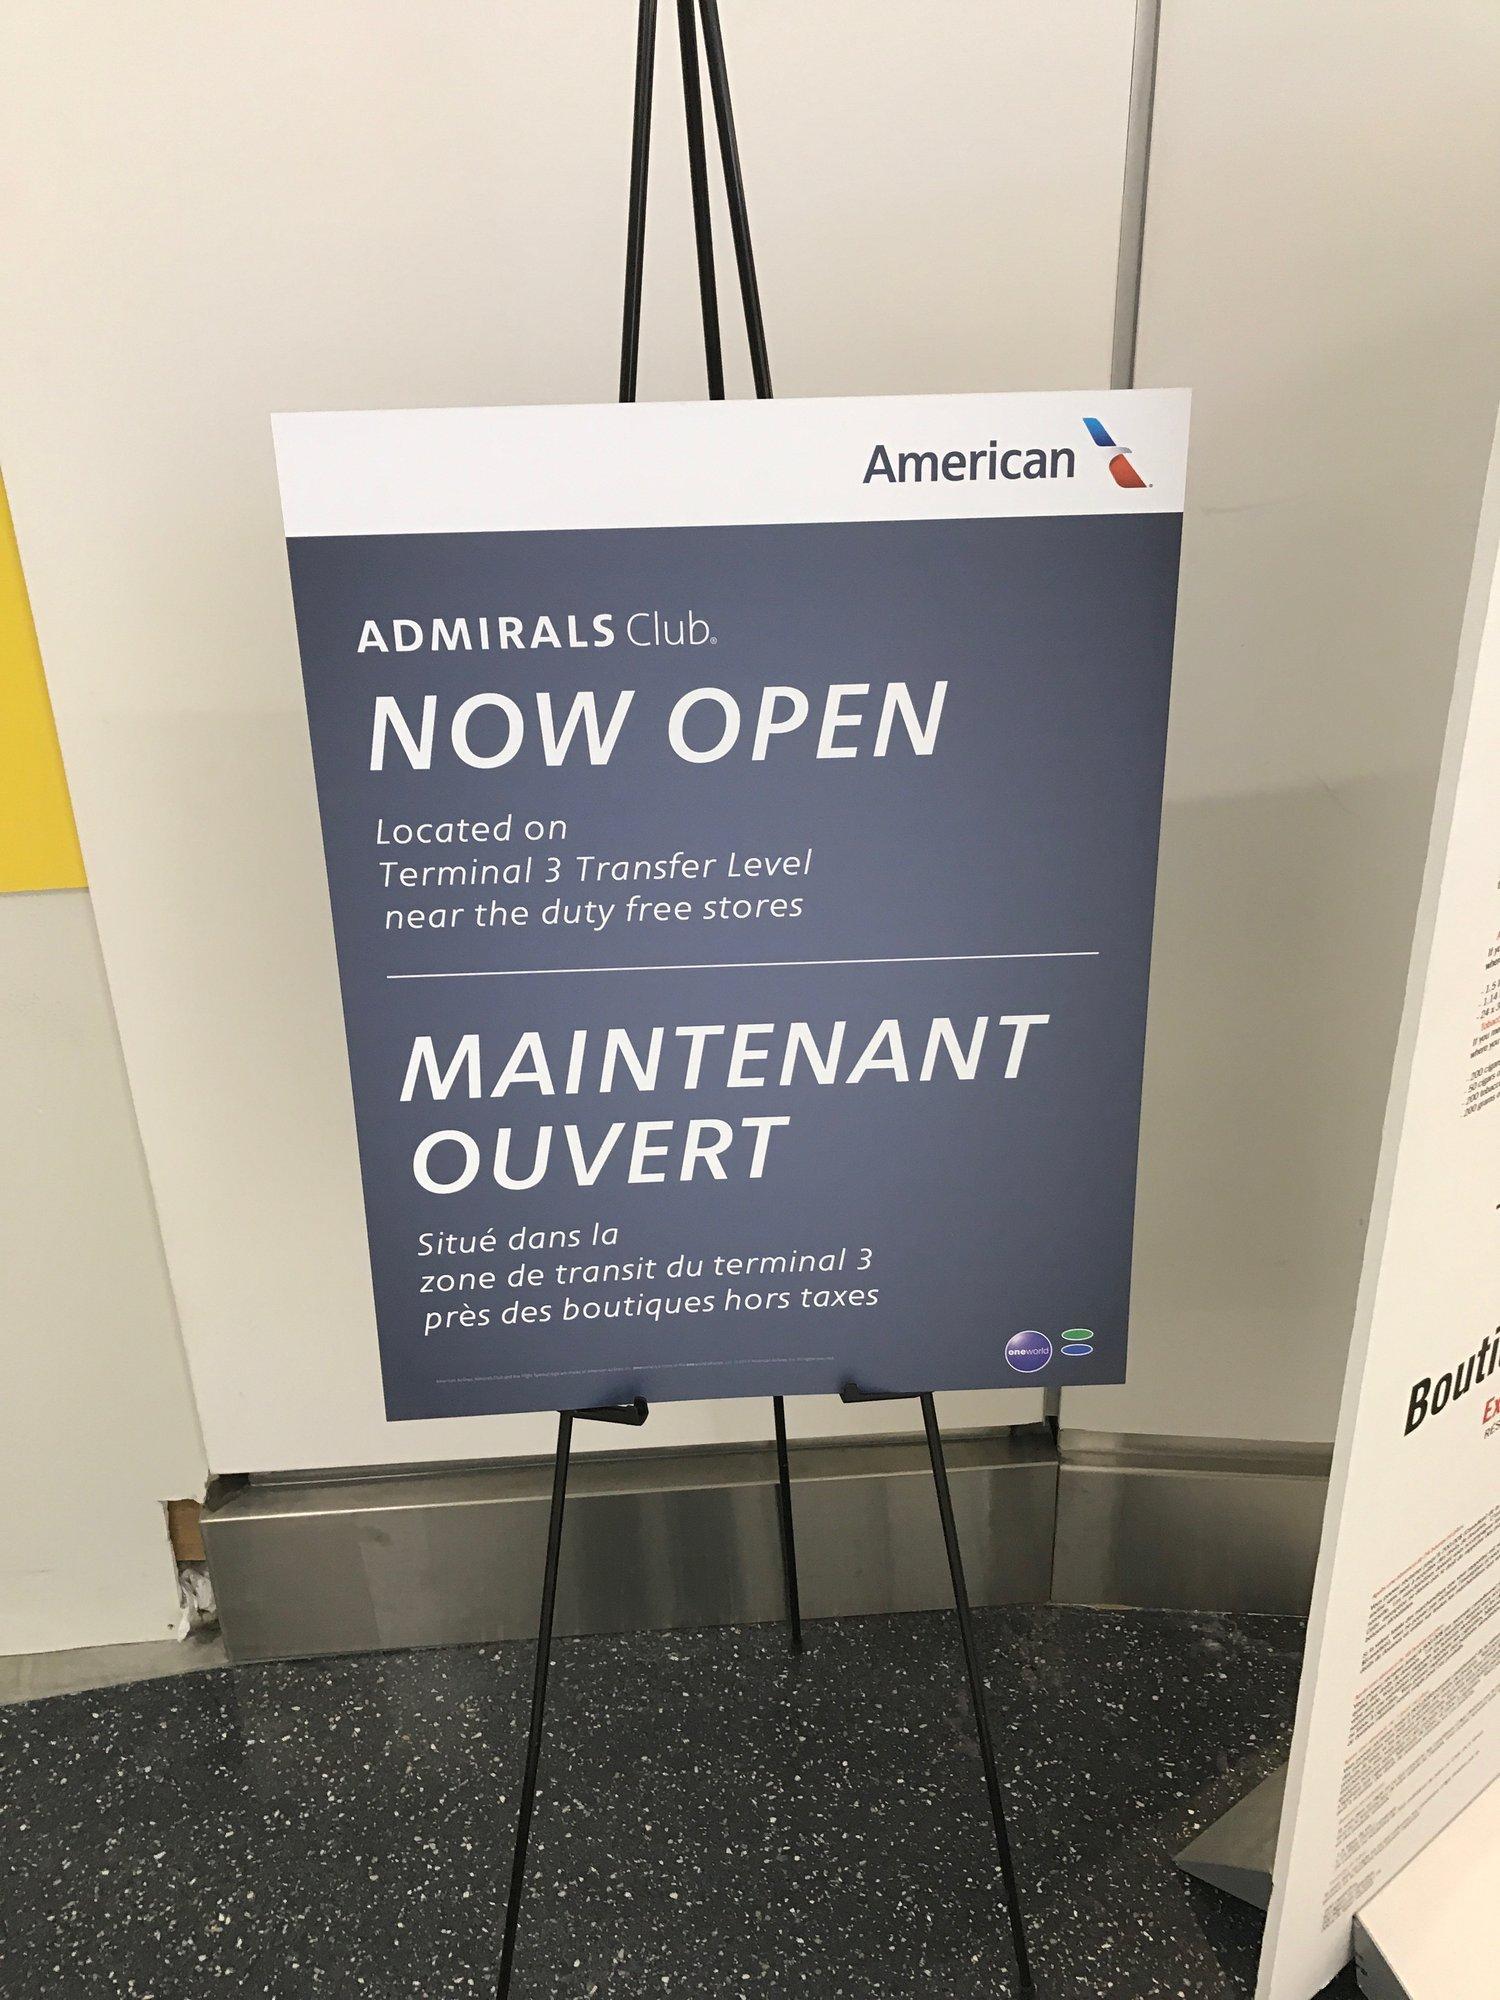 American Airlines Admirals Club image 4 of 9